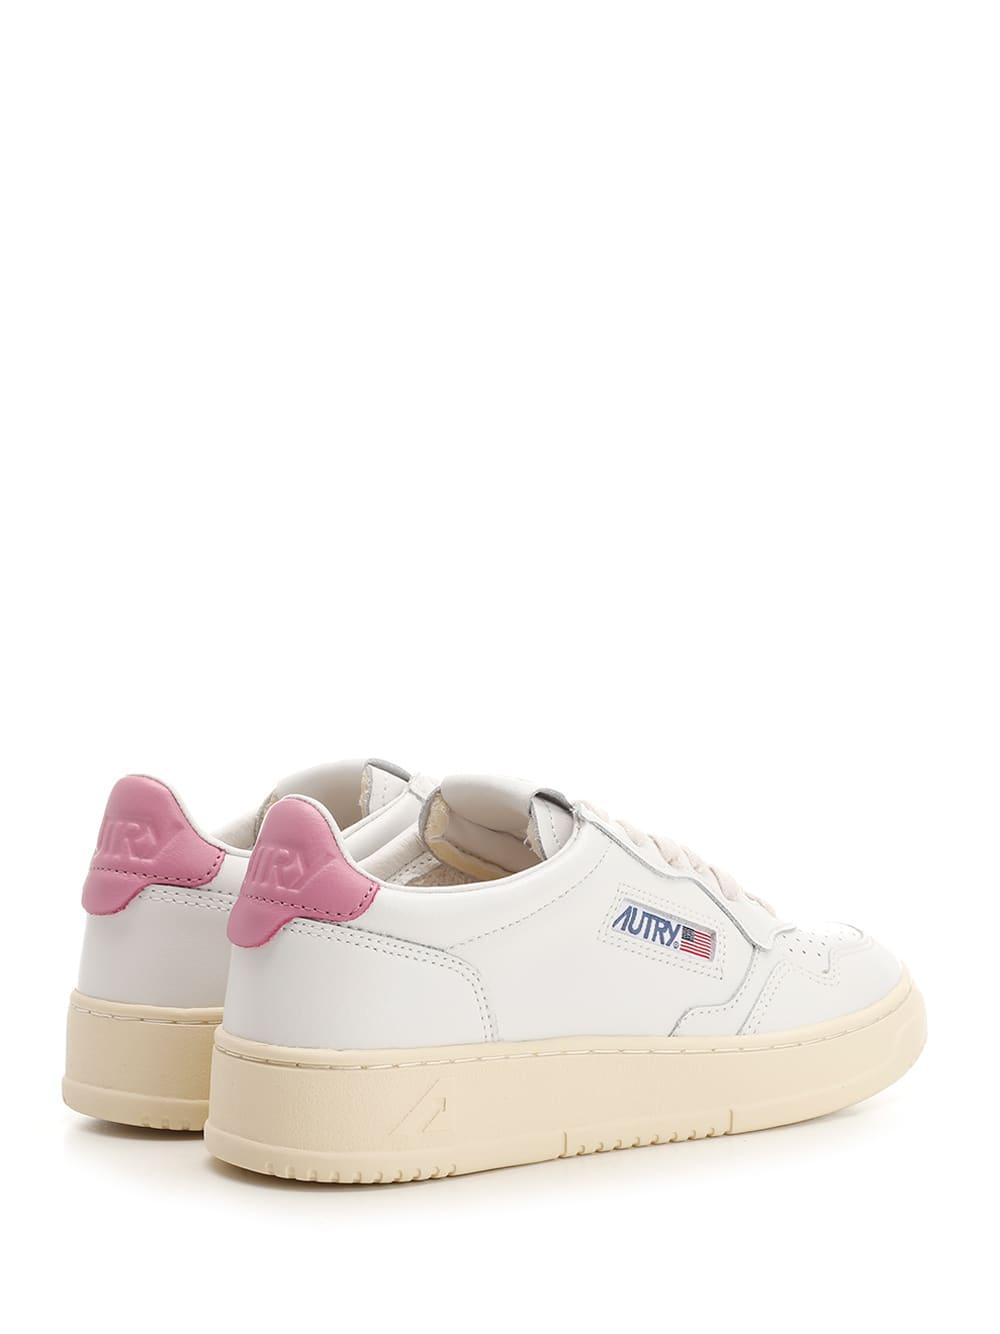 Autry Medalist Low Sneakers With Mauve Heel in White | Lyst